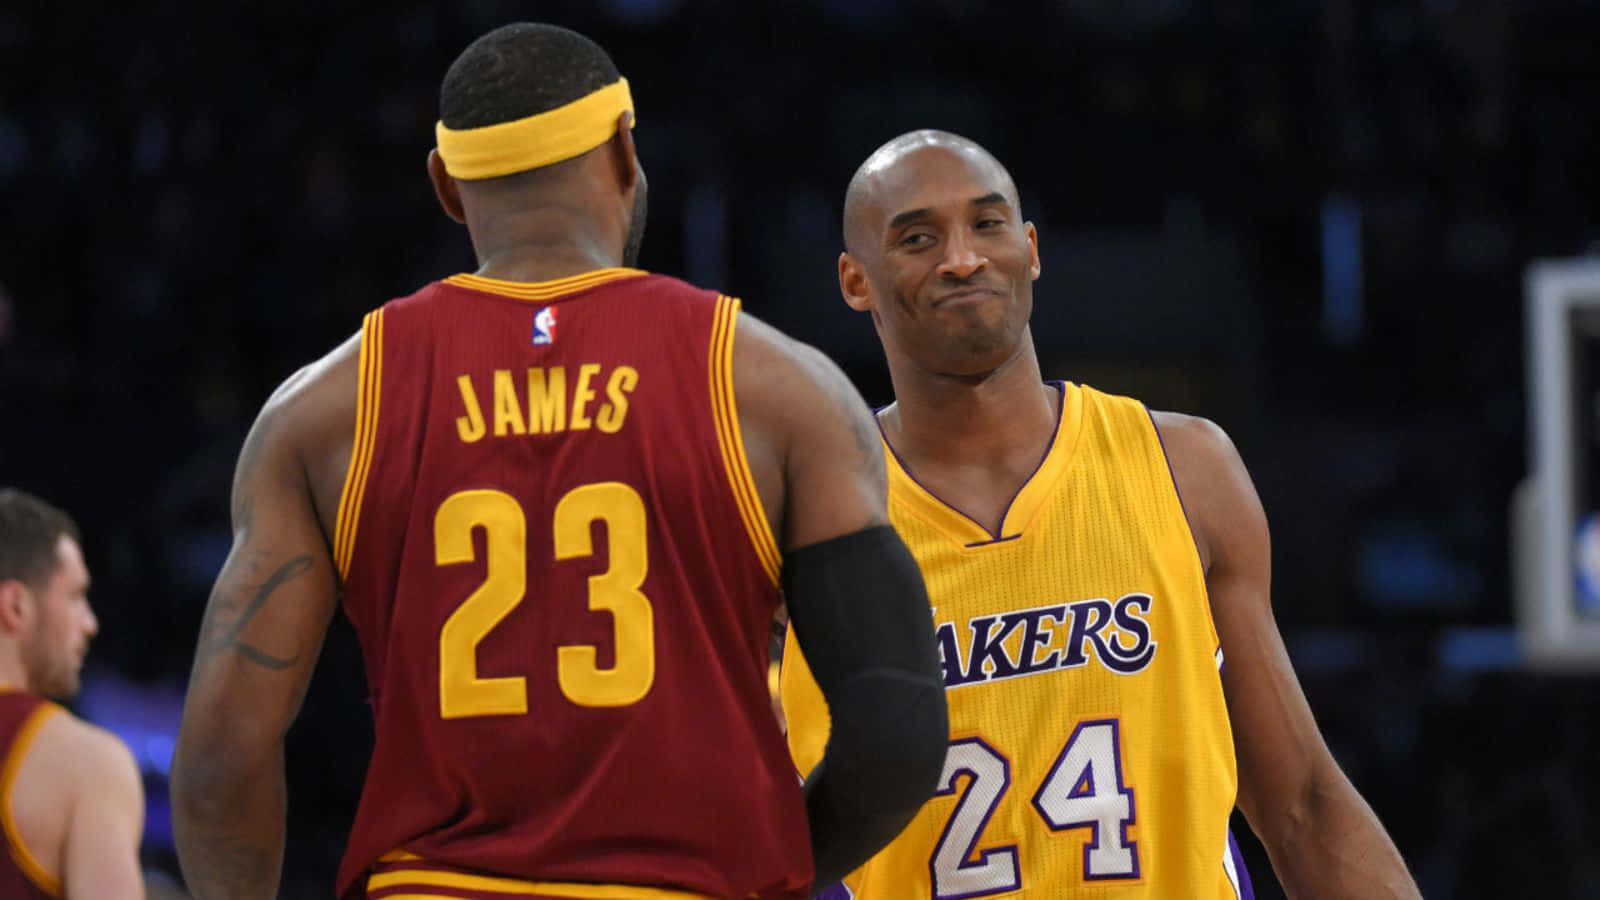 Lebron And Kobe Smirking After A Play Wallpaper